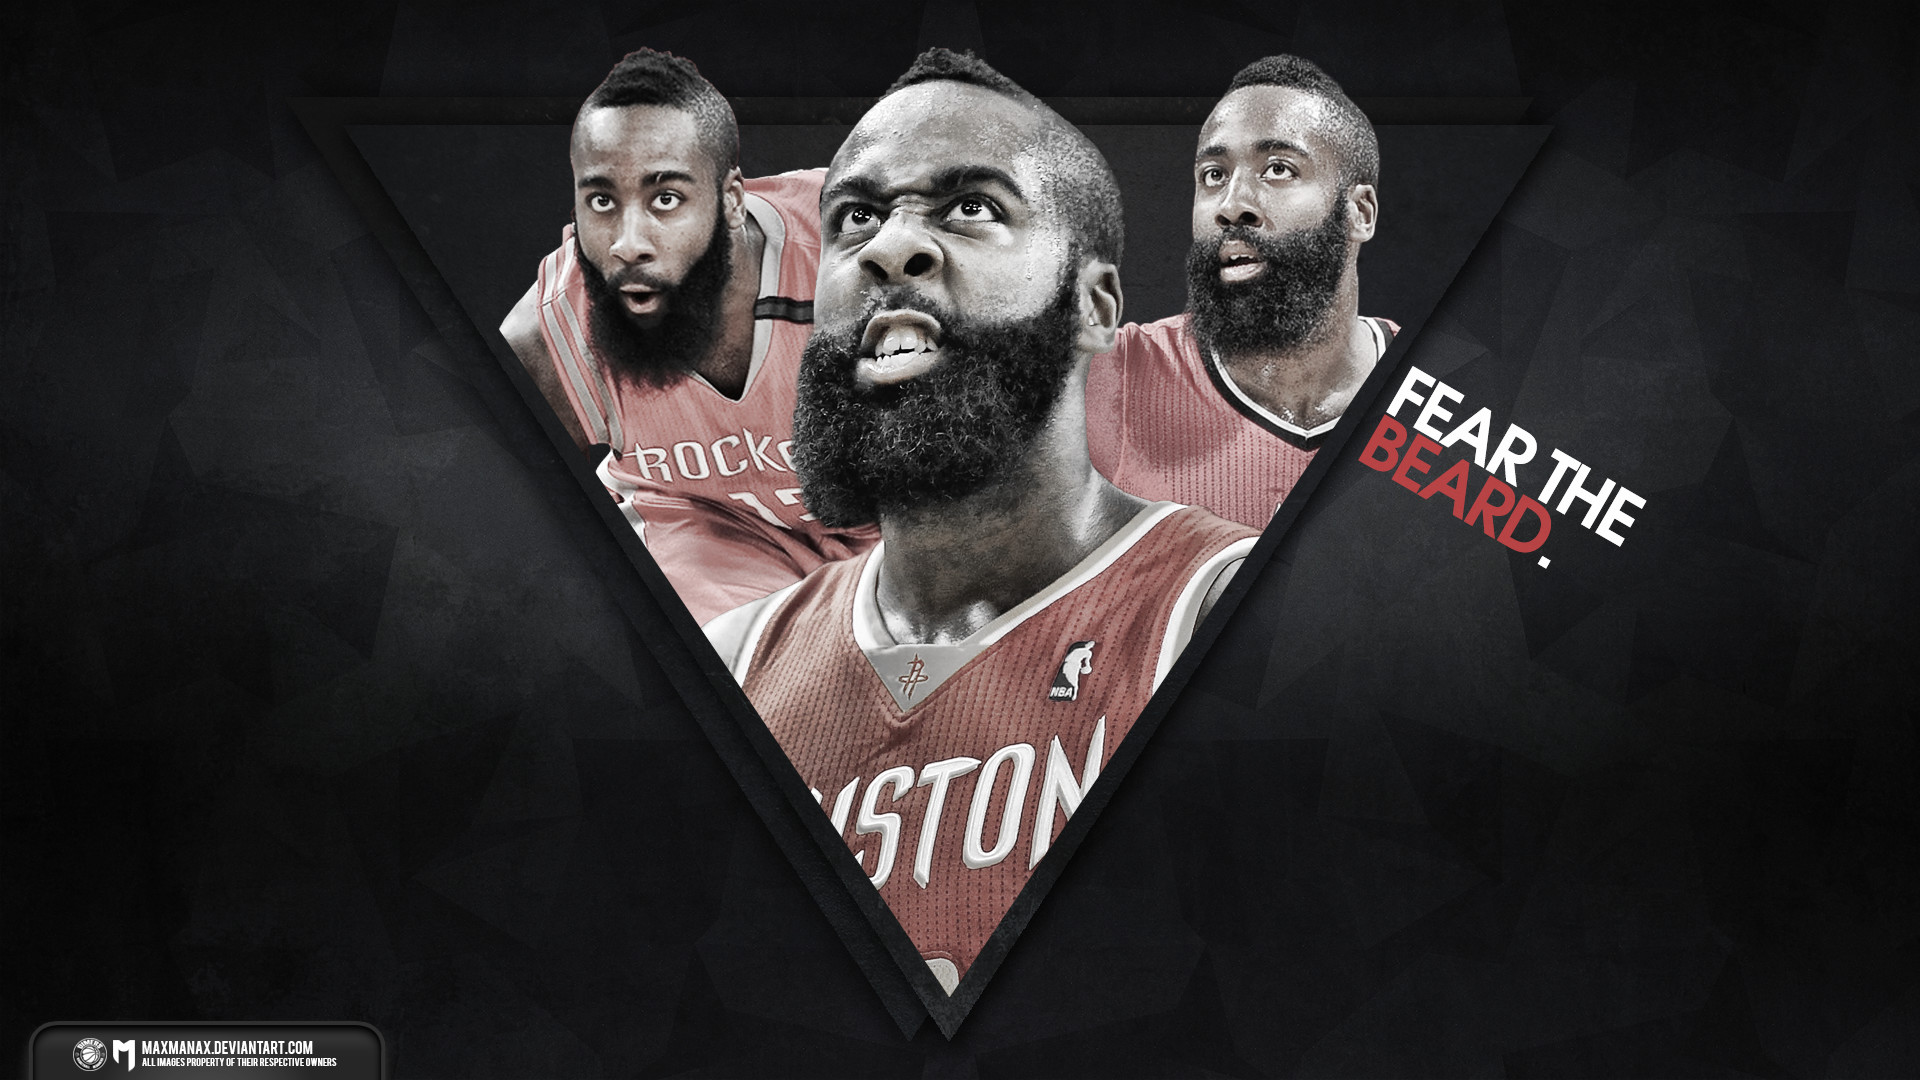 James Harden Contract Extension James harden fear the beard poster